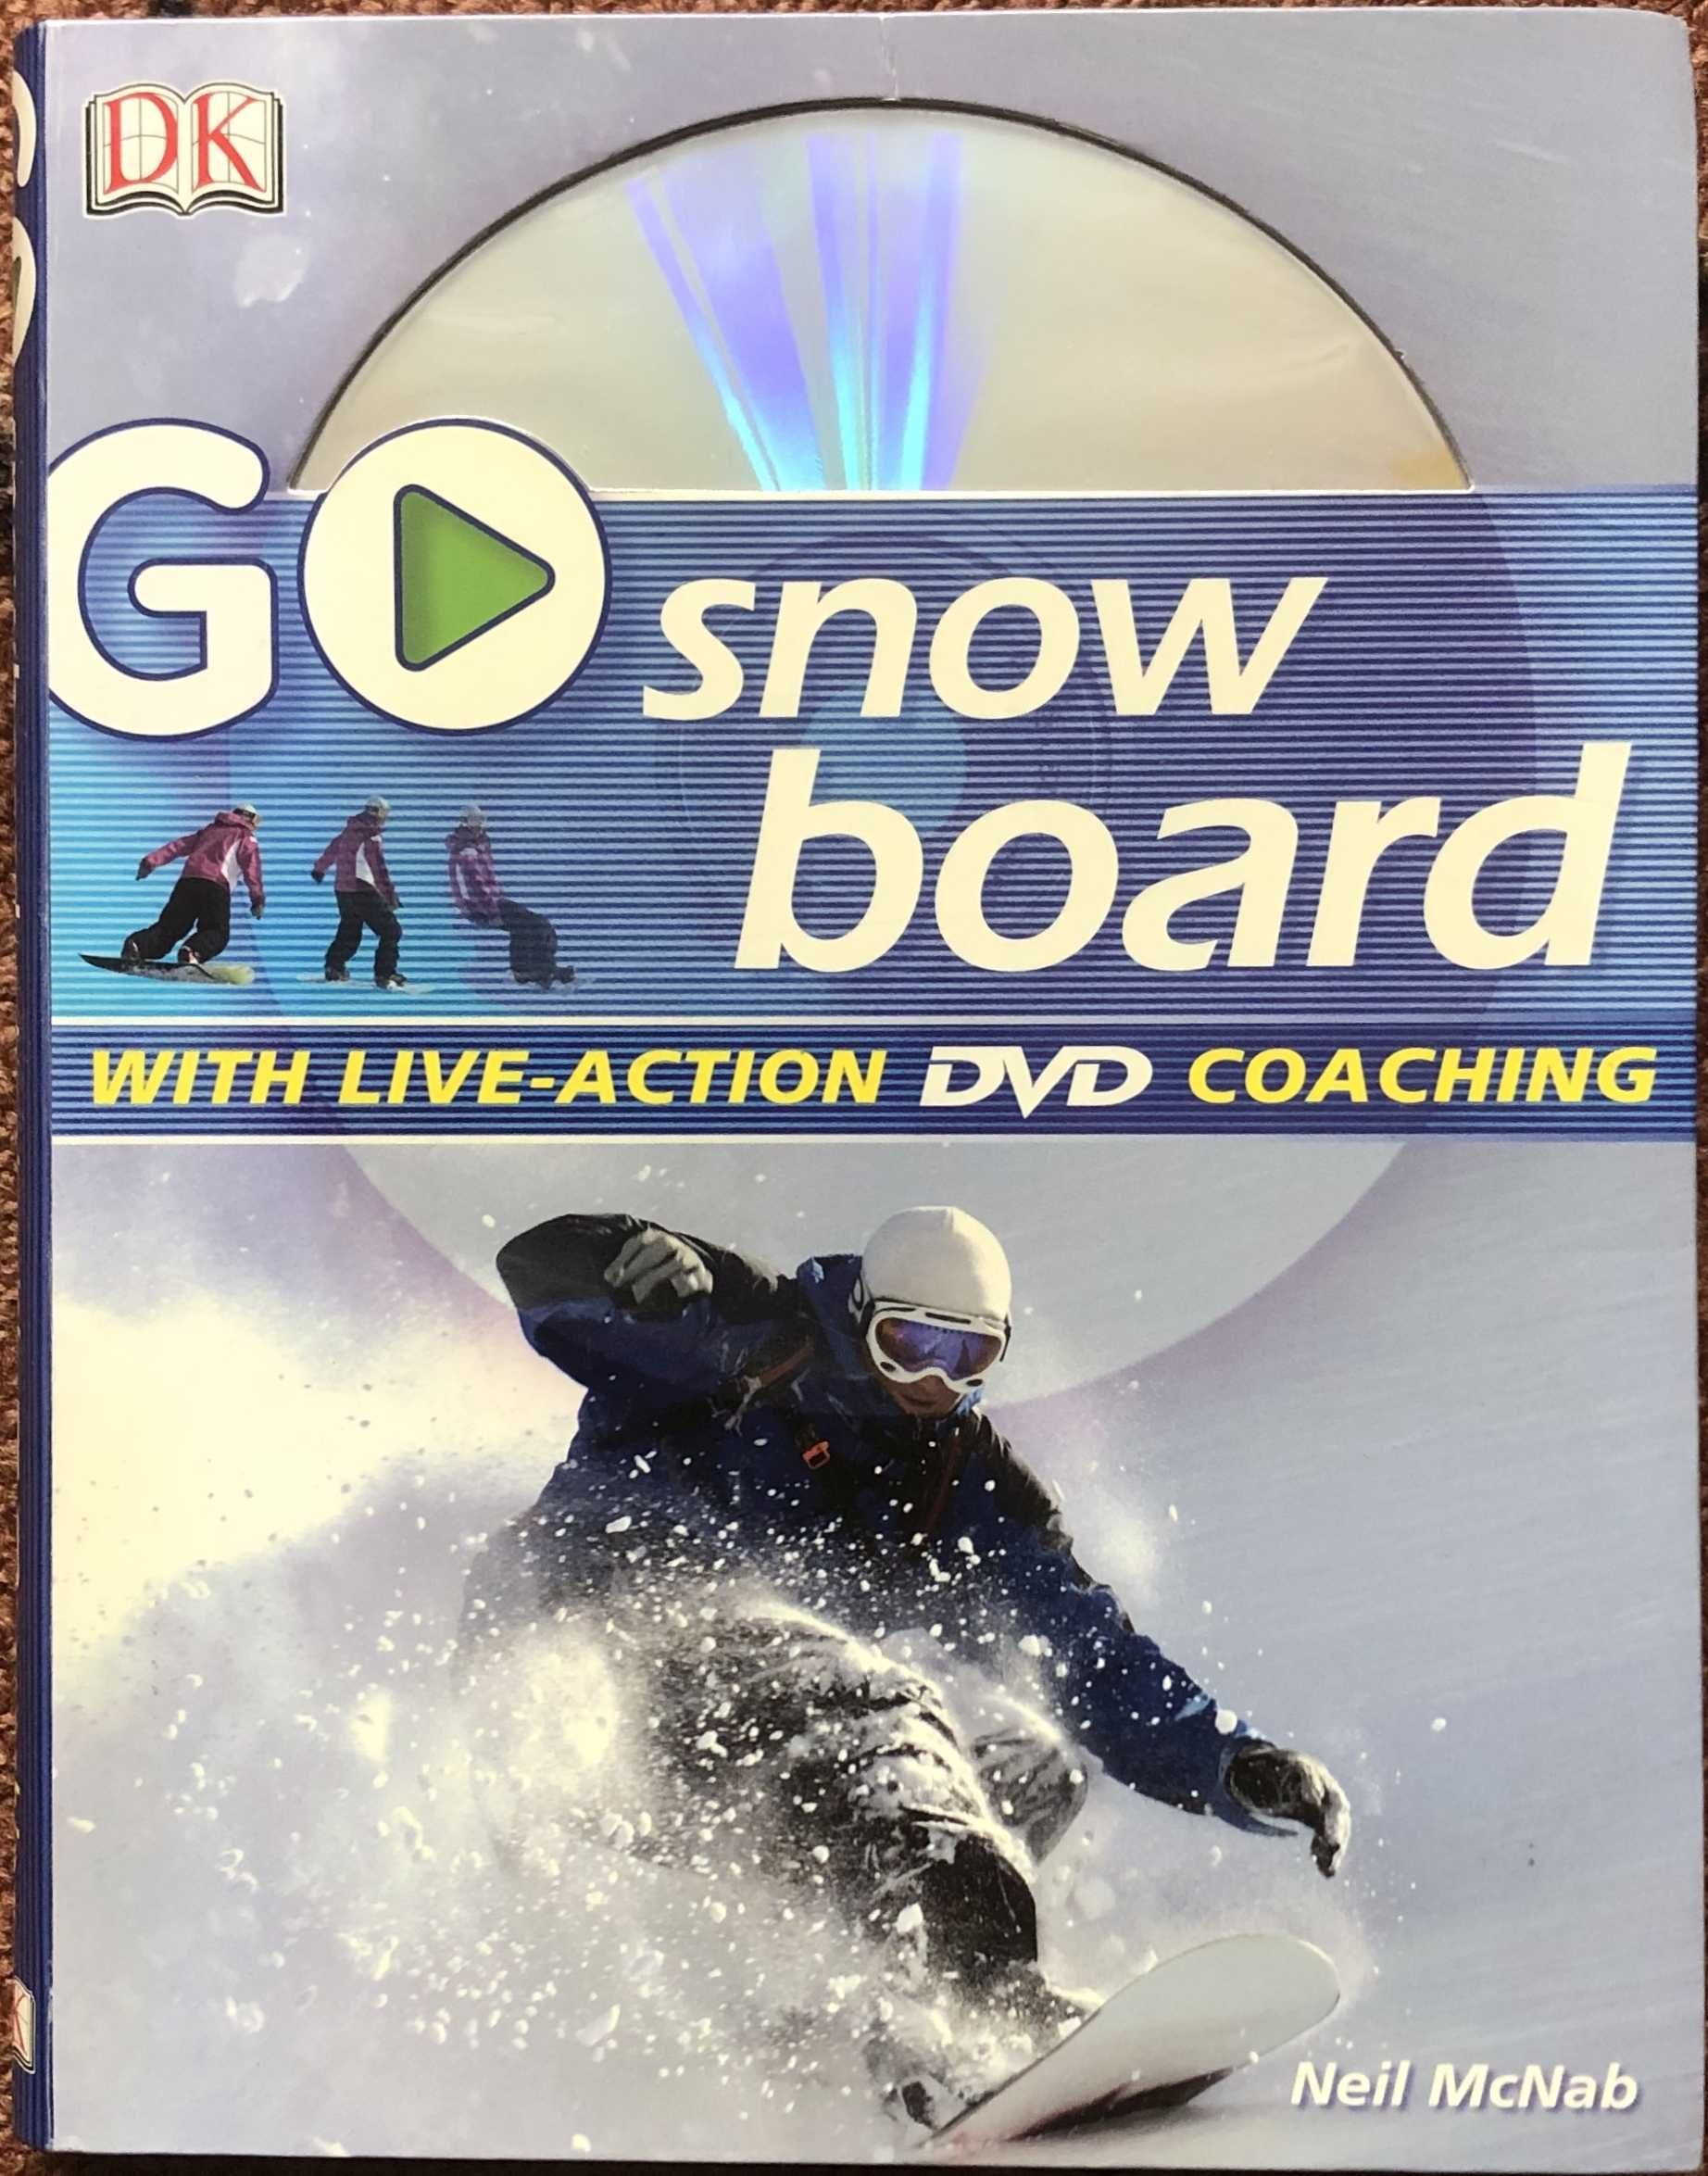 Go snowboard with live action DVD coaching by Neil McNab